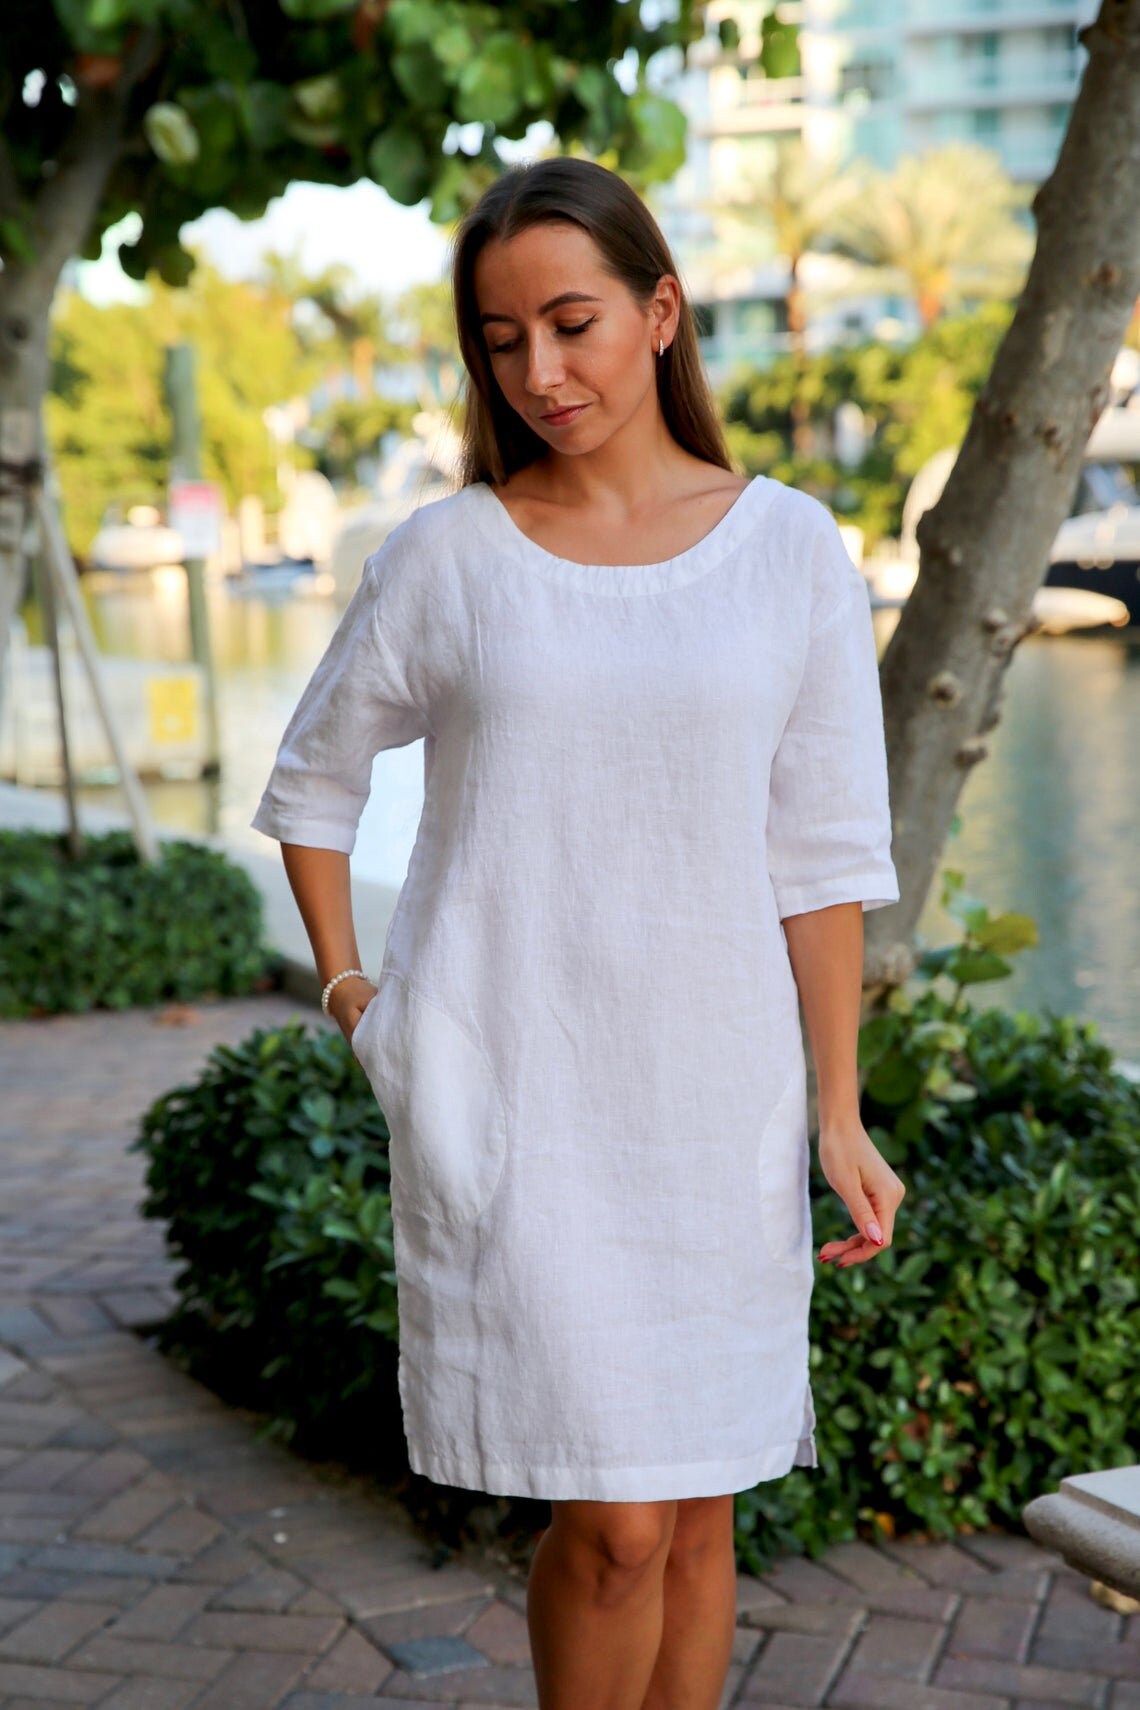 Linen dress with 3/4 sleeves and pockets, encapsulating the essence of boho elegance.